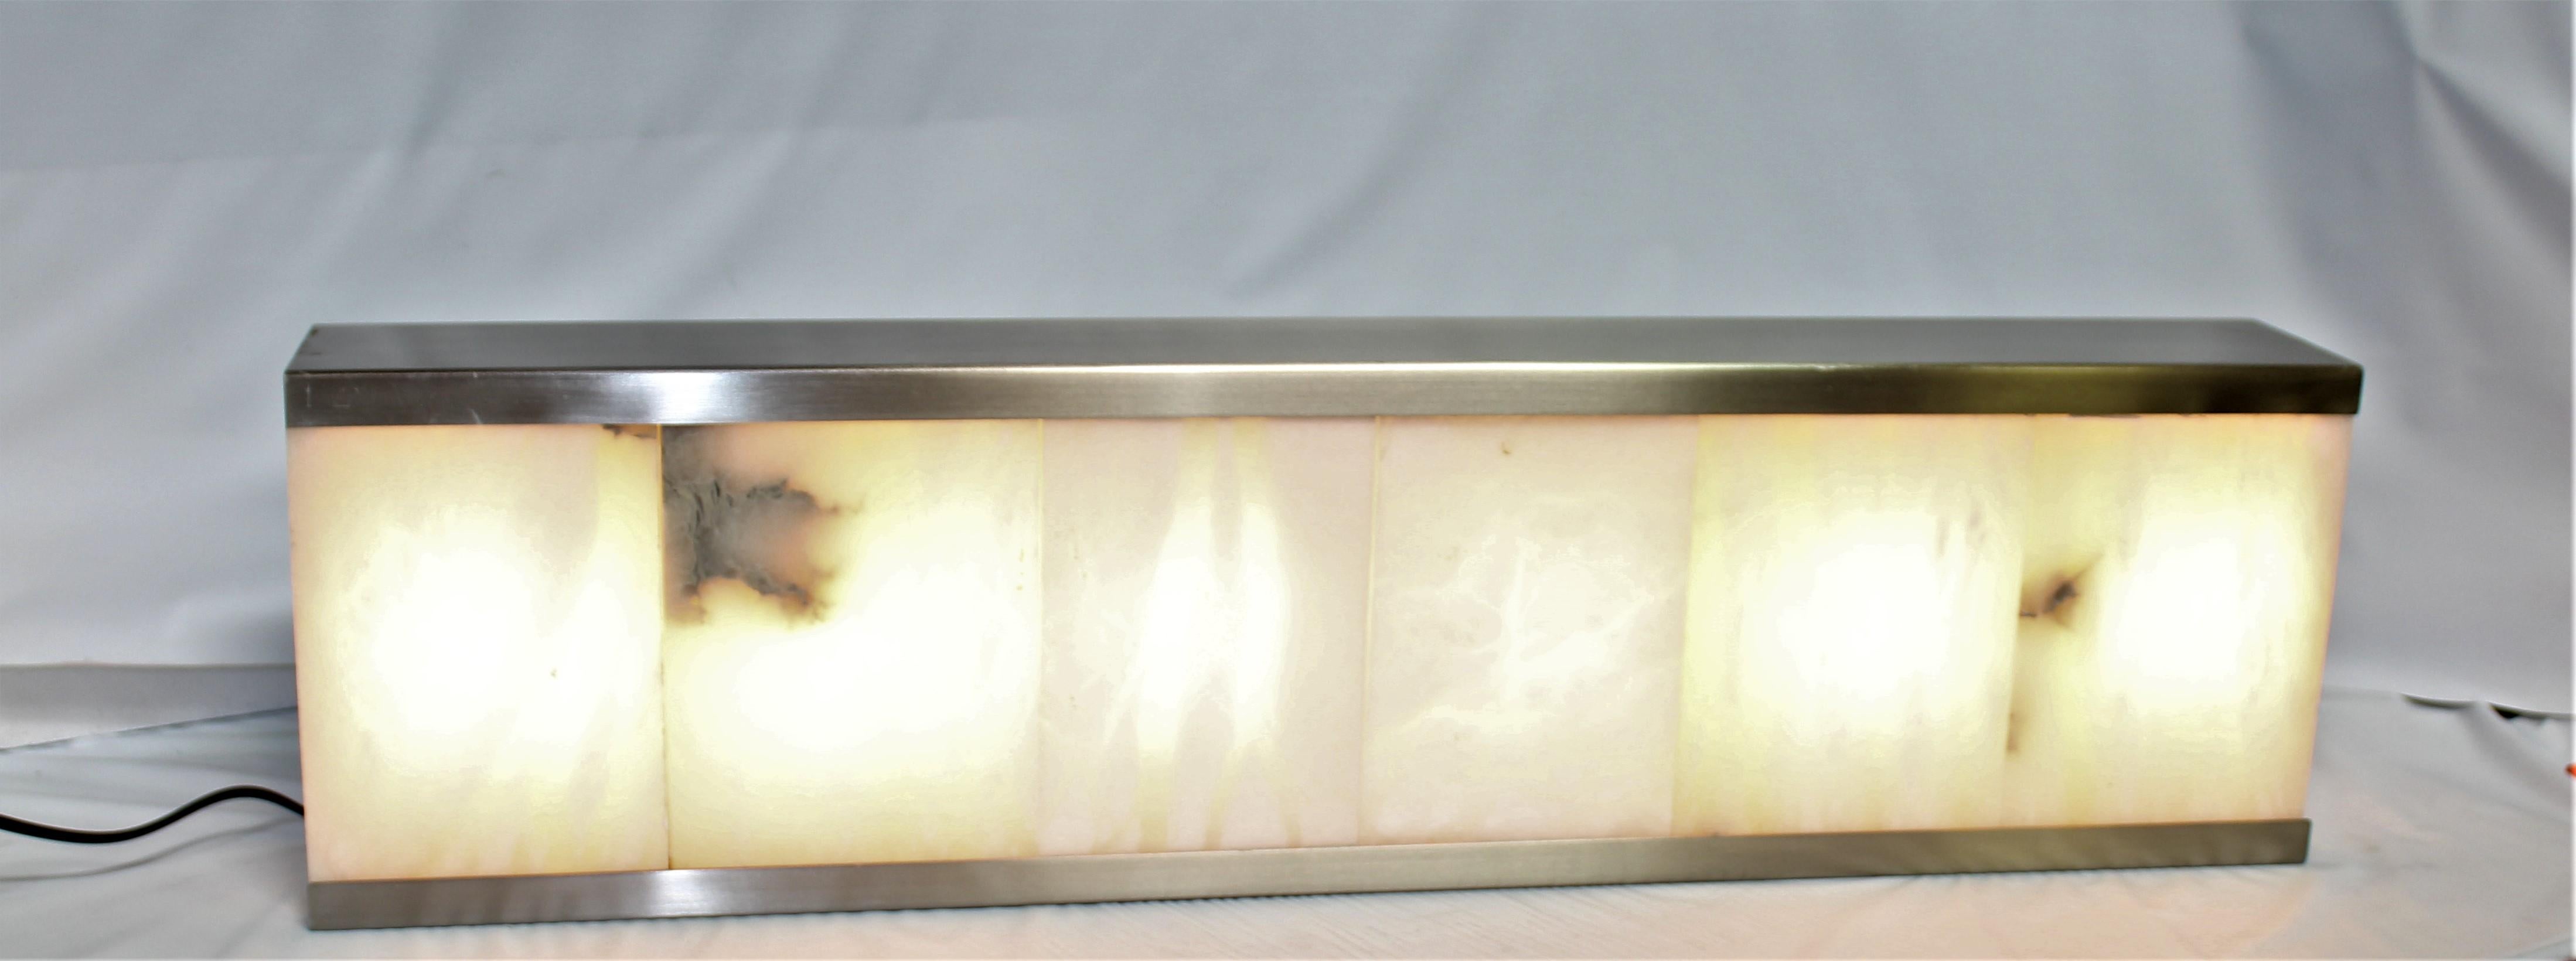 Large size rectangle sconce. Blocks of alabaster cut to fit the metal frame. All satin nickel finished. Over 30 1/2